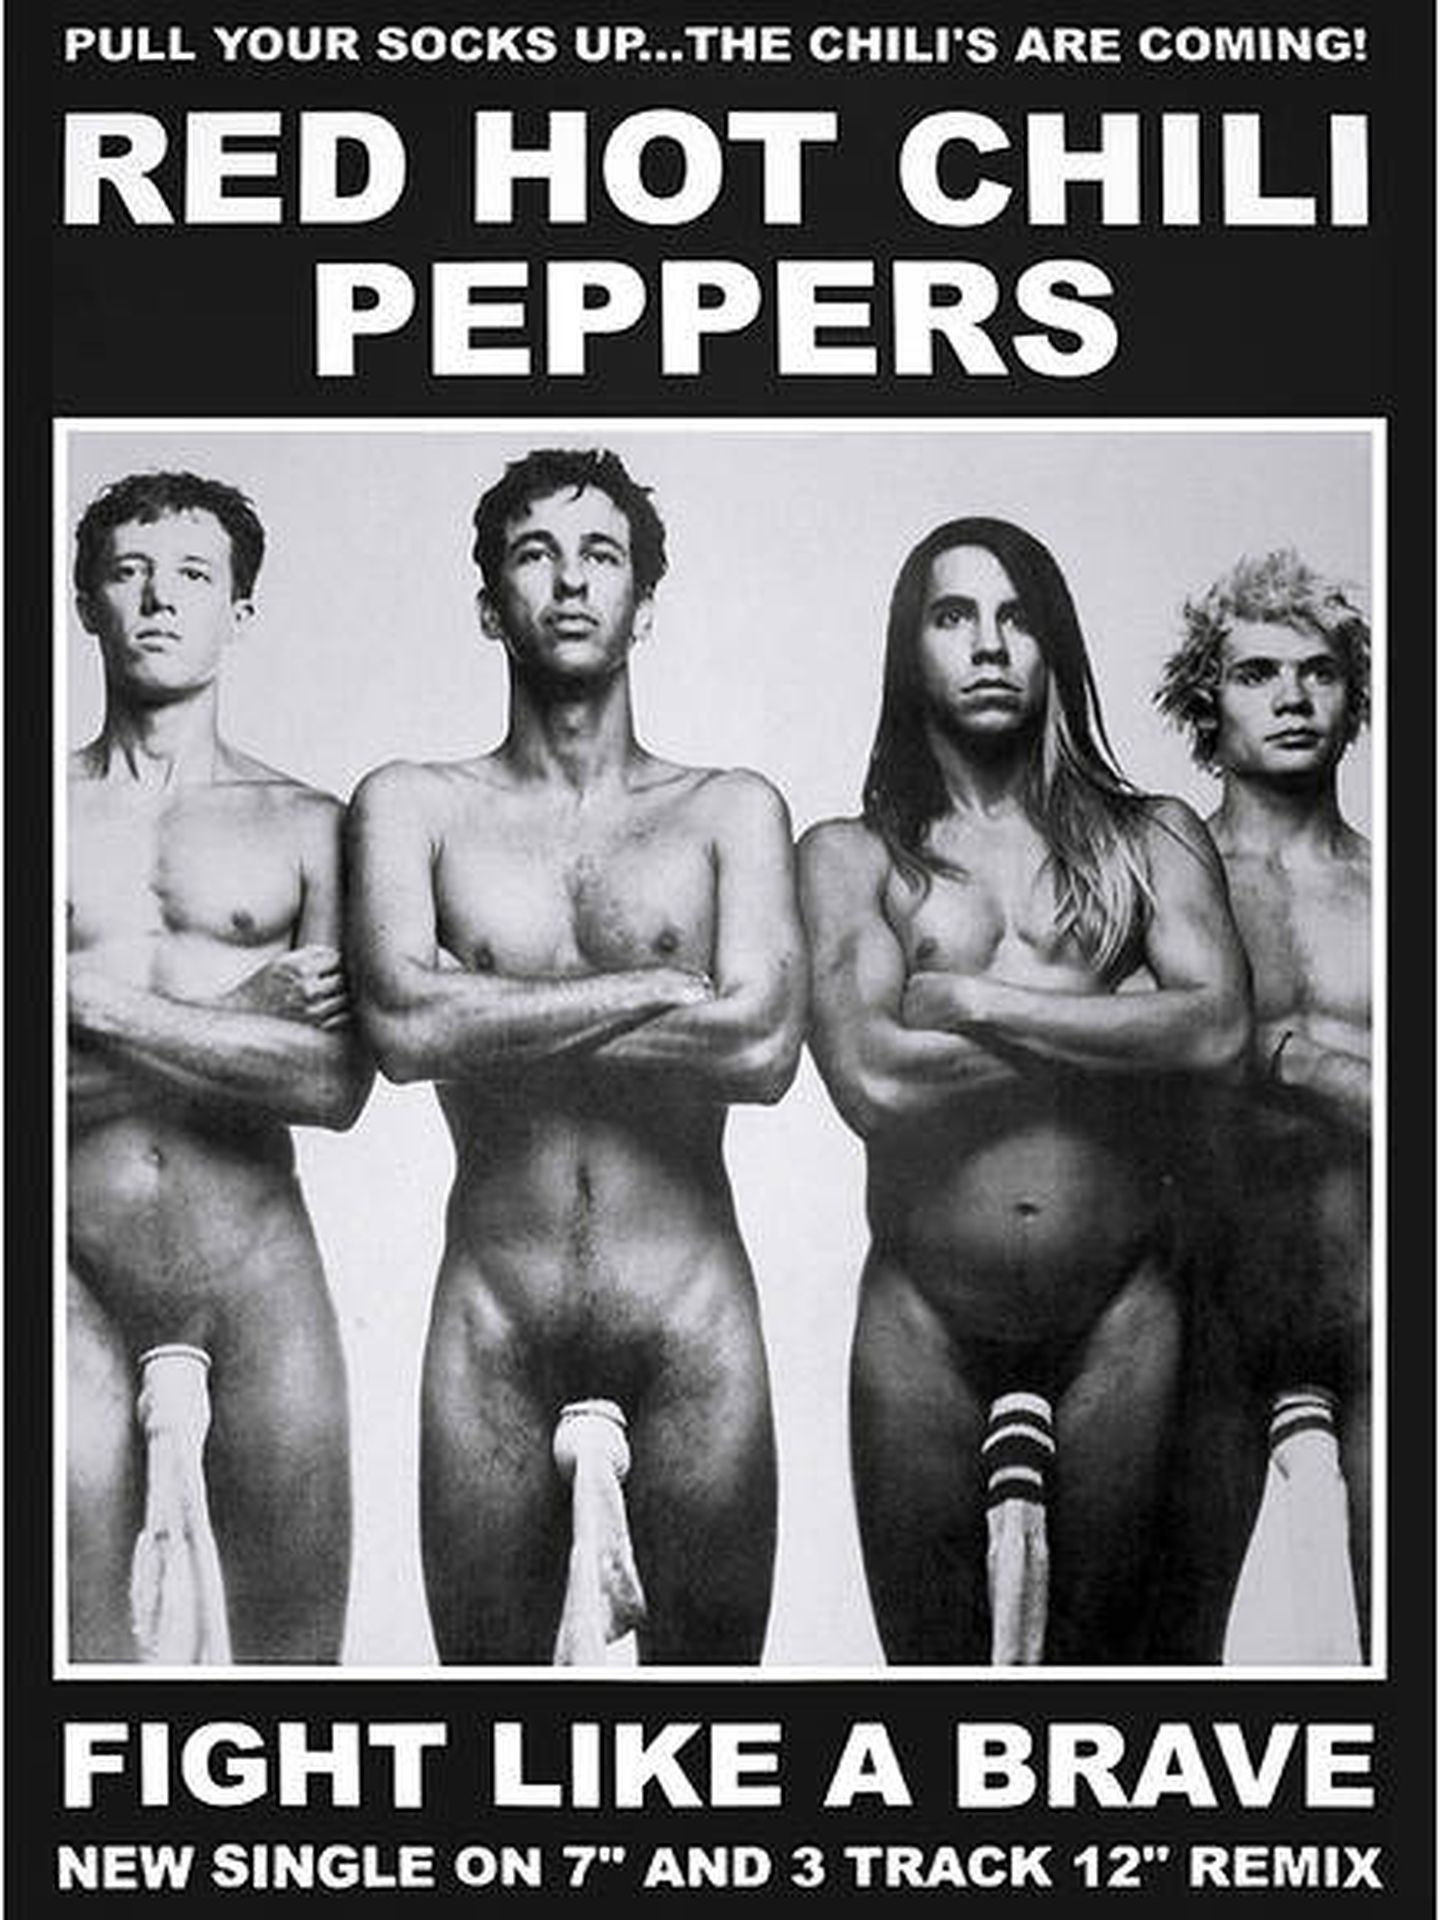 Cartel de los Red Hot Chili Peppers